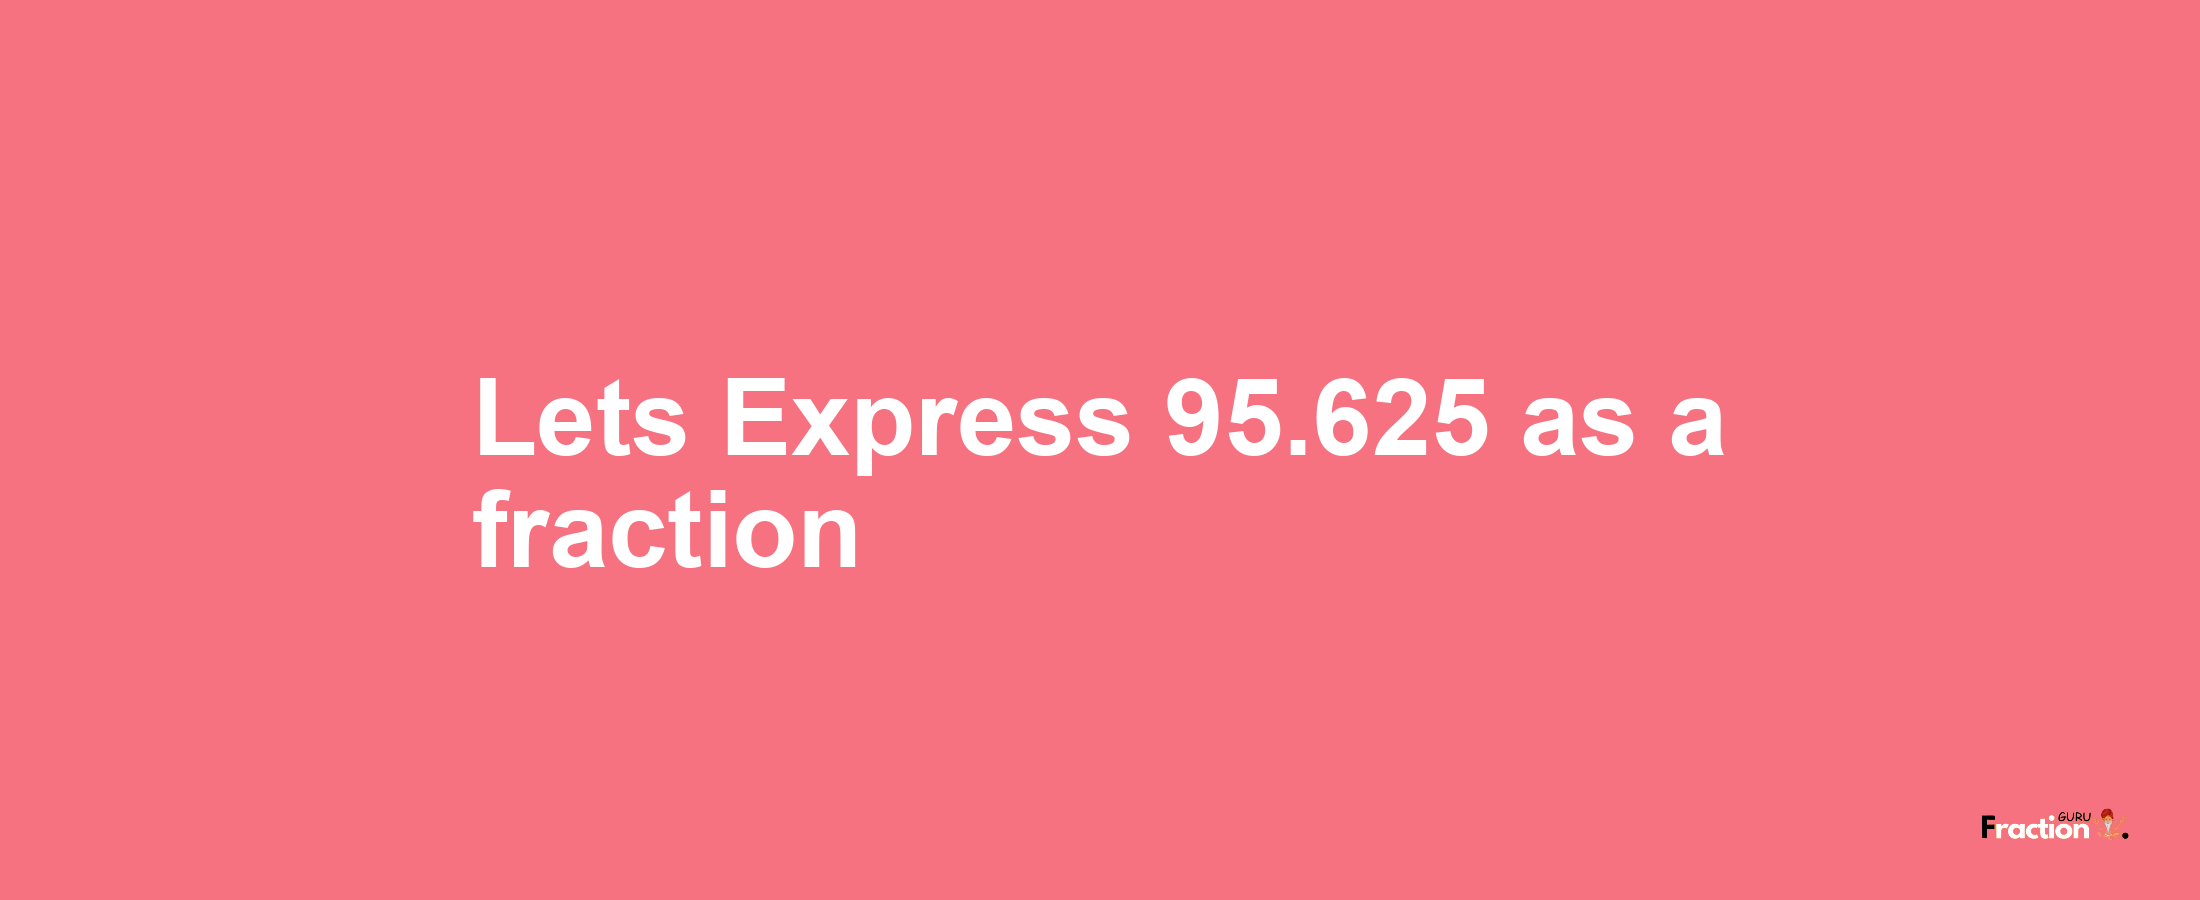 Lets Express 95.625 as afraction